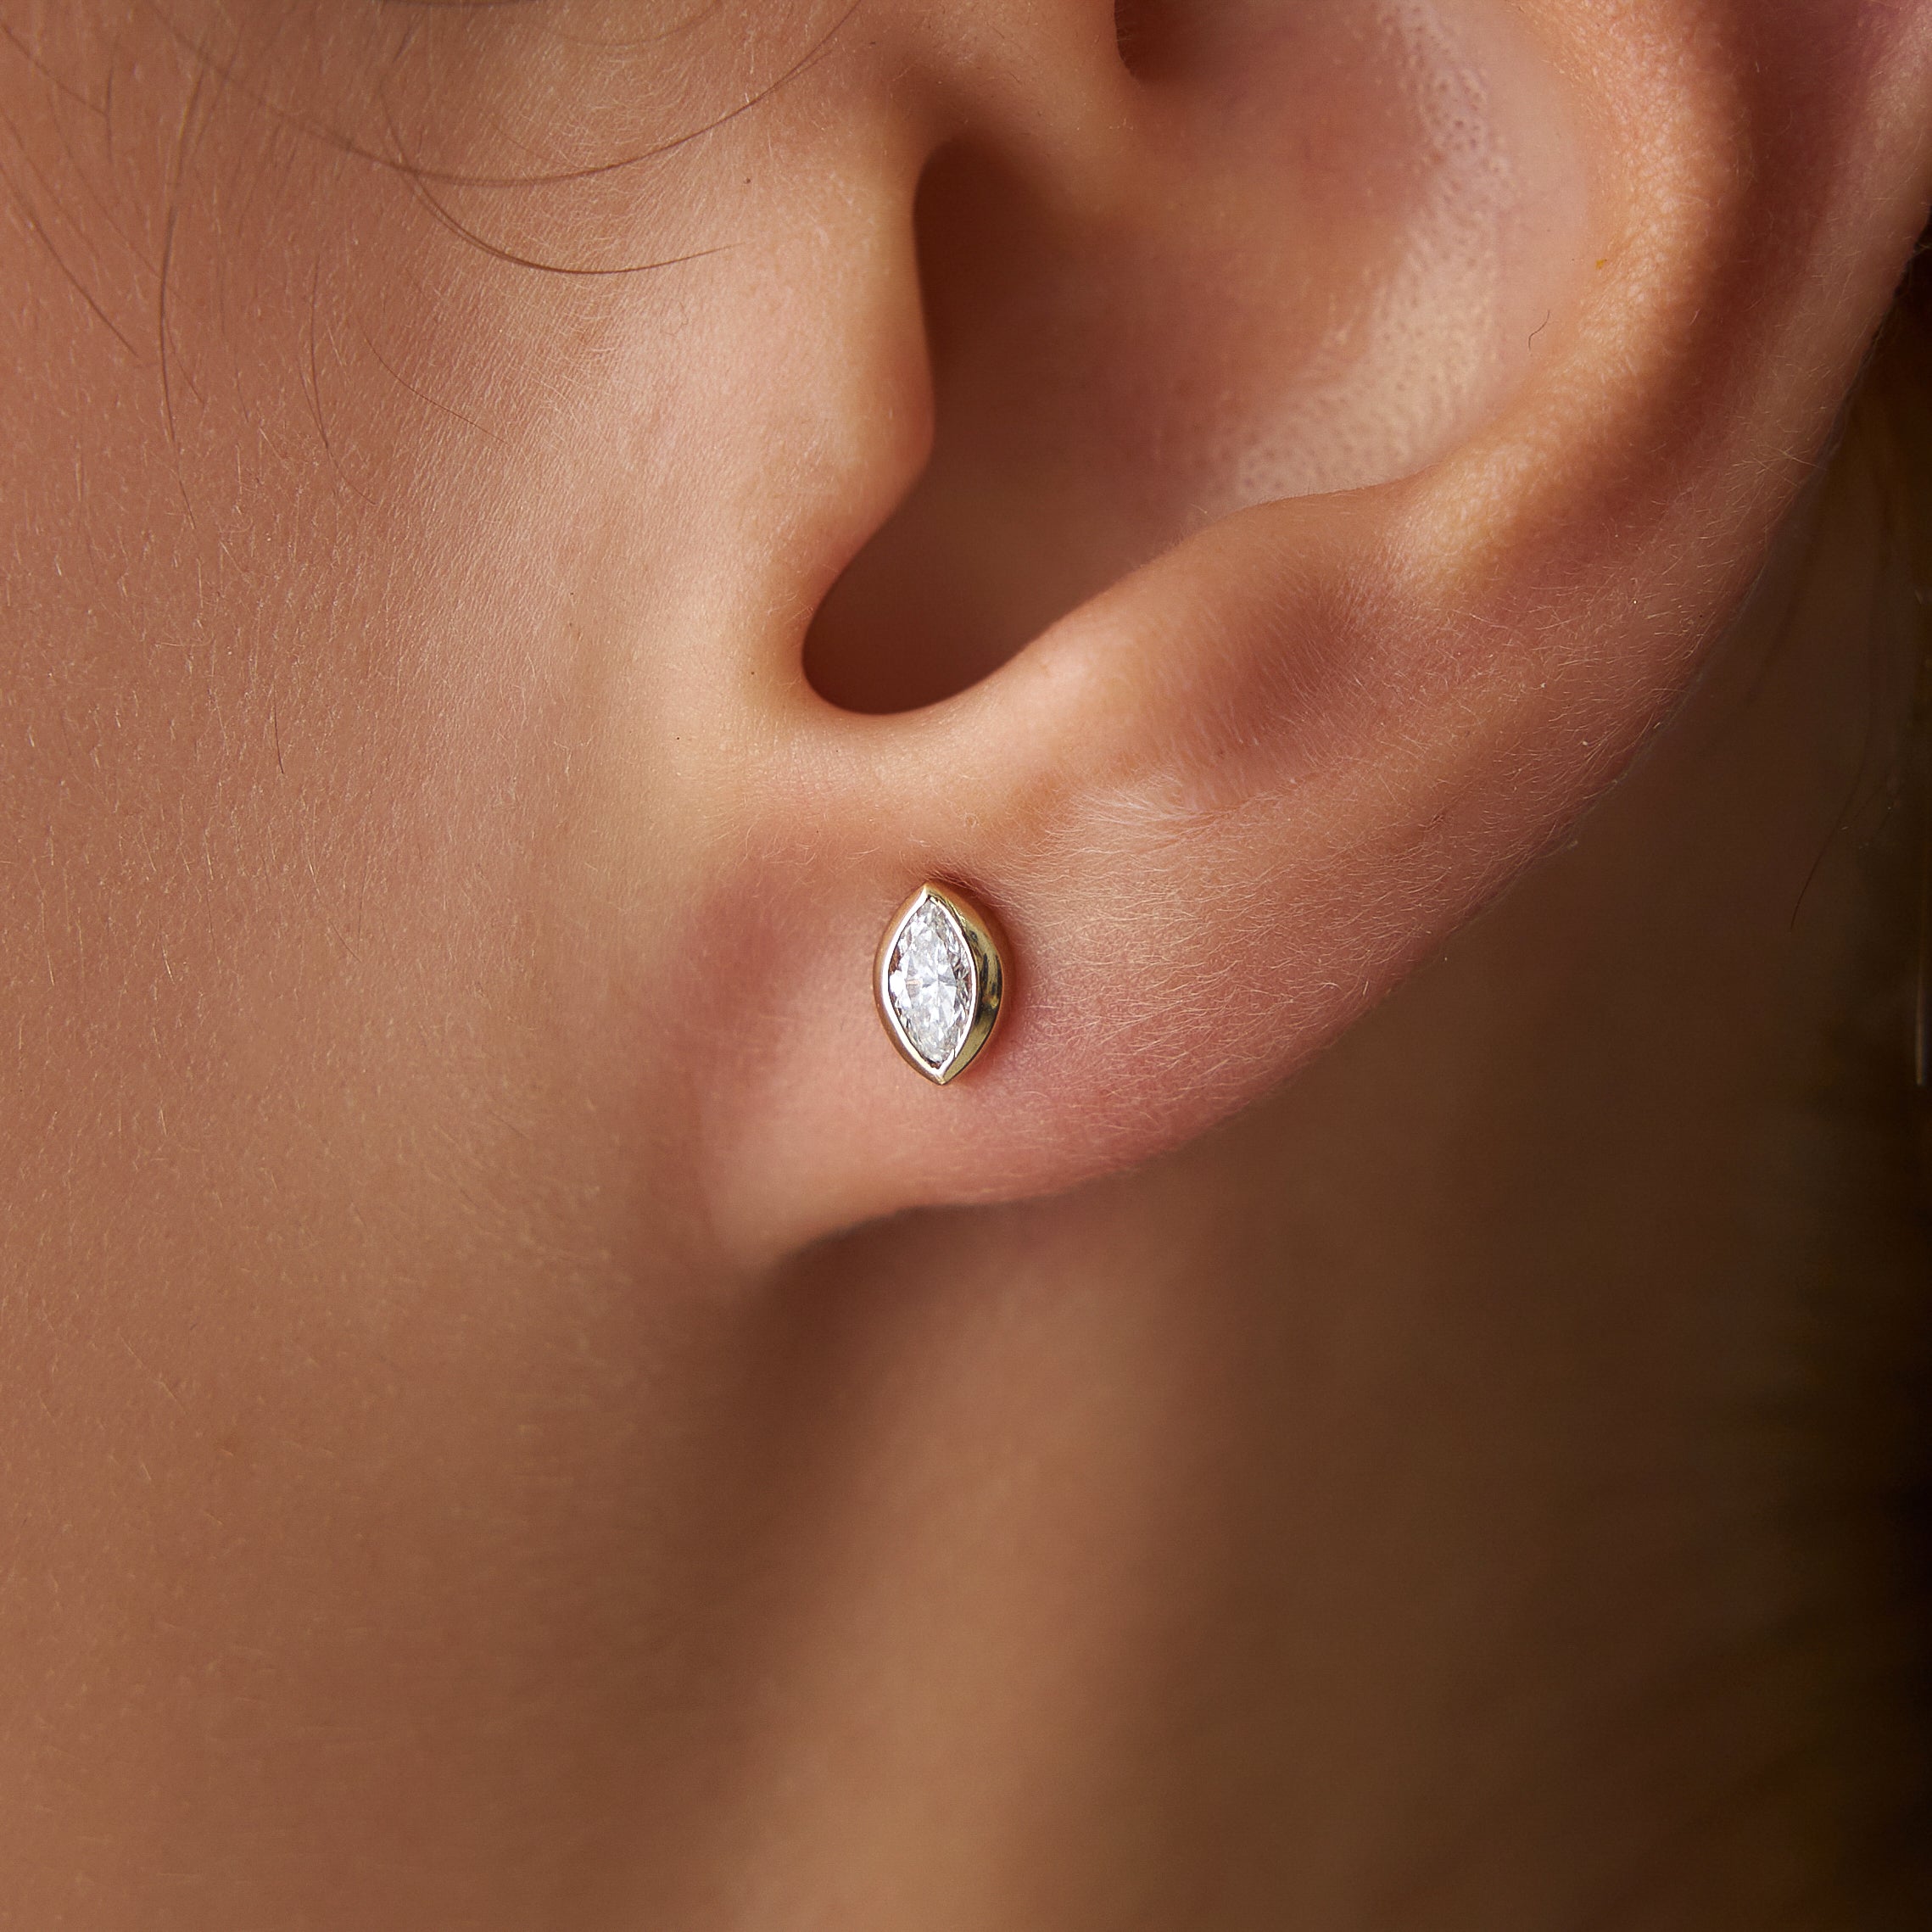 Marquise Diamond Stud Earrings Available in 14K and 18K Gold